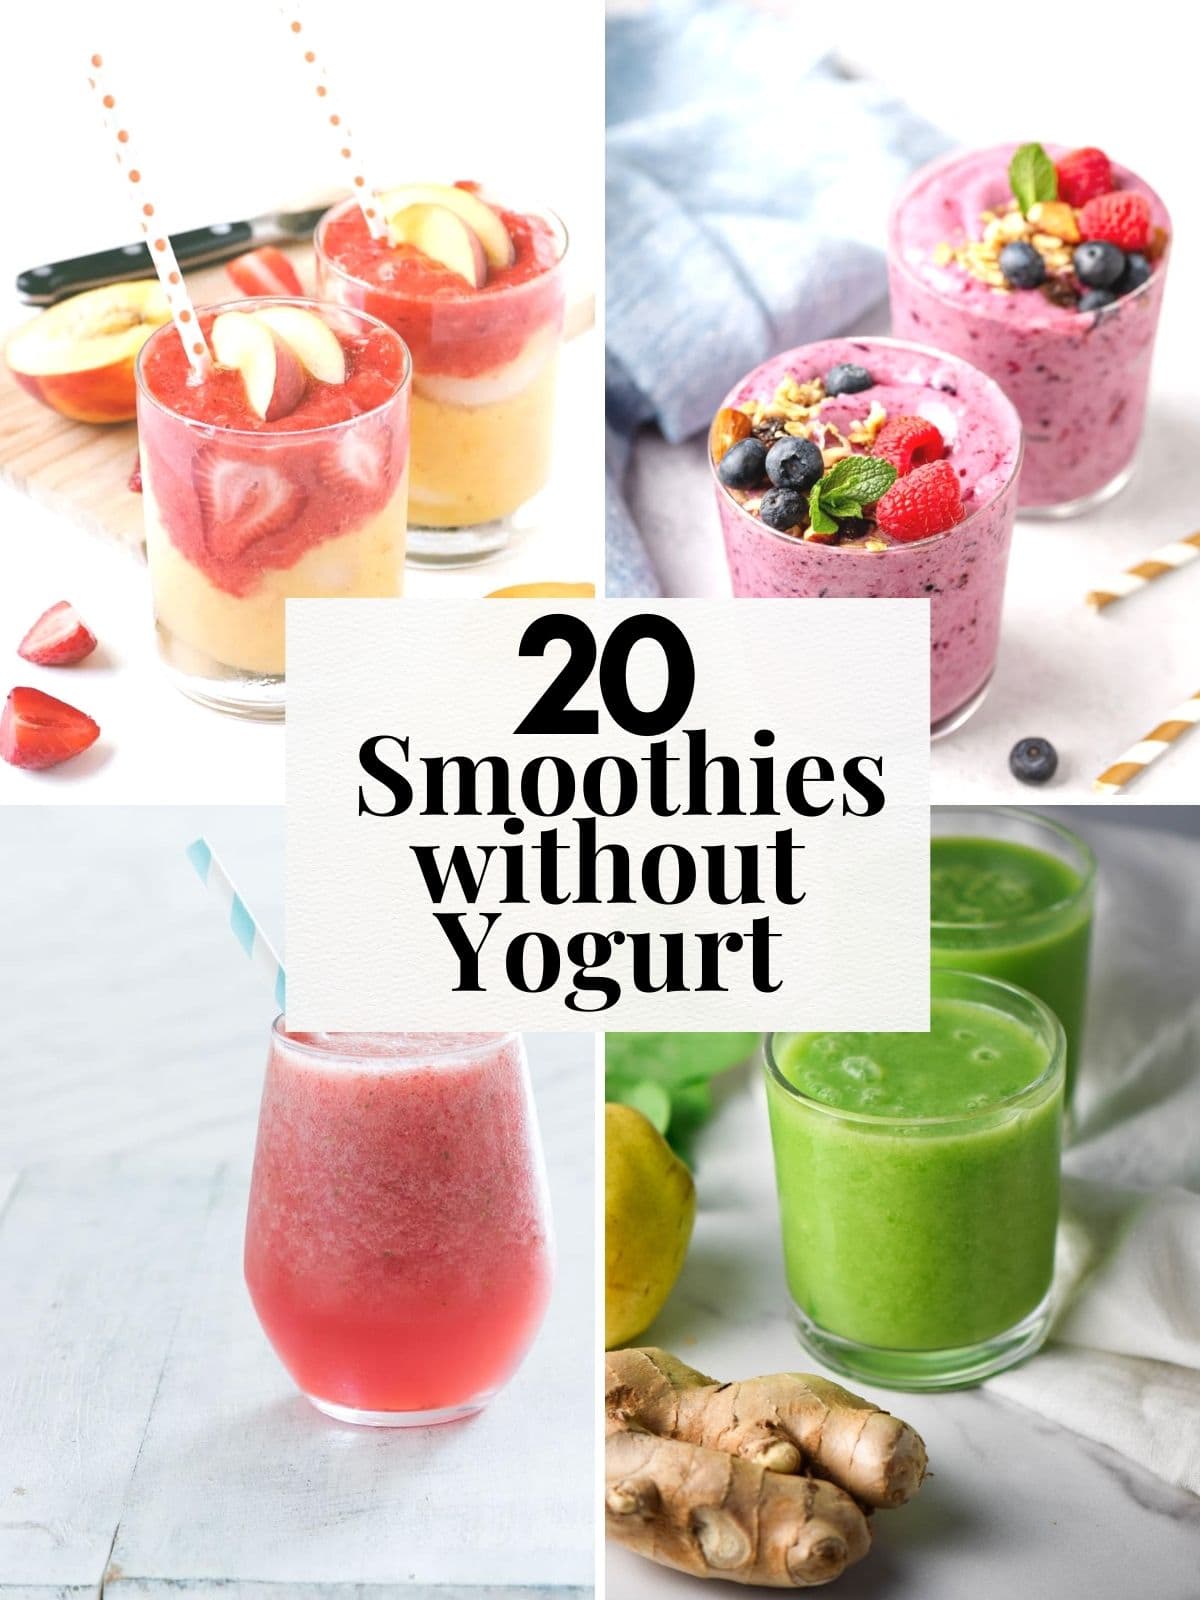 20 Best Smoothie Recipes without Yogurt - The Dizzy Cook